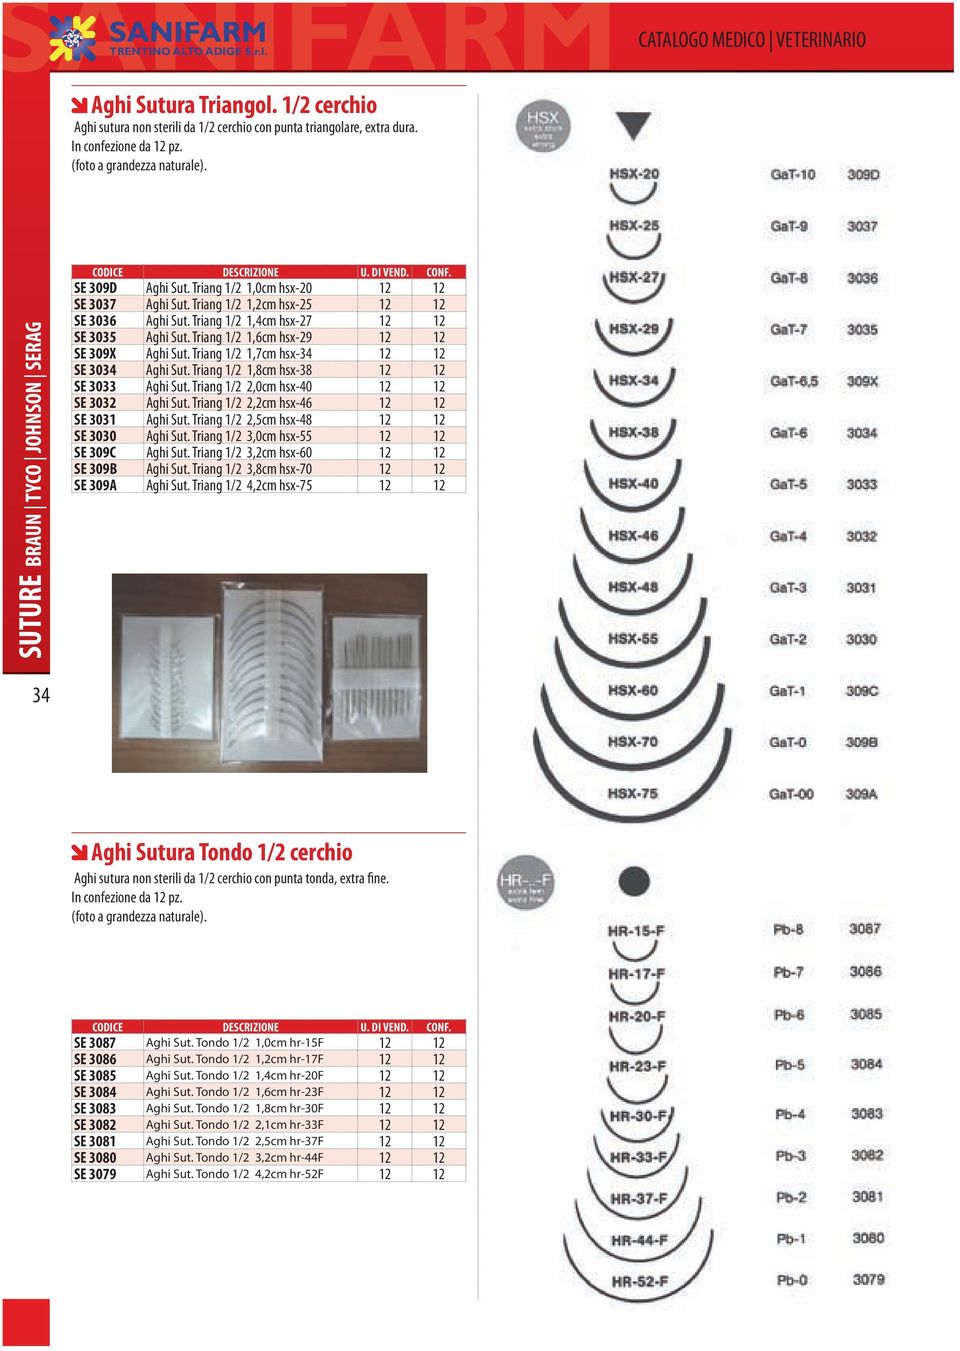 Triang 1/2 2,0cm hsx-40 12 12 SE 3032 Aghi Sut. Triang 1/2 2,2cm hsx-46 12 12 SE 3031 Aghi Sut. Triang 1/2 2,5cm hsx-48 12 12 SE 3030 Aghi Sut. Triang 1/2 3,0cm hsx-55 12 12 SE 309C Aghi Sut.